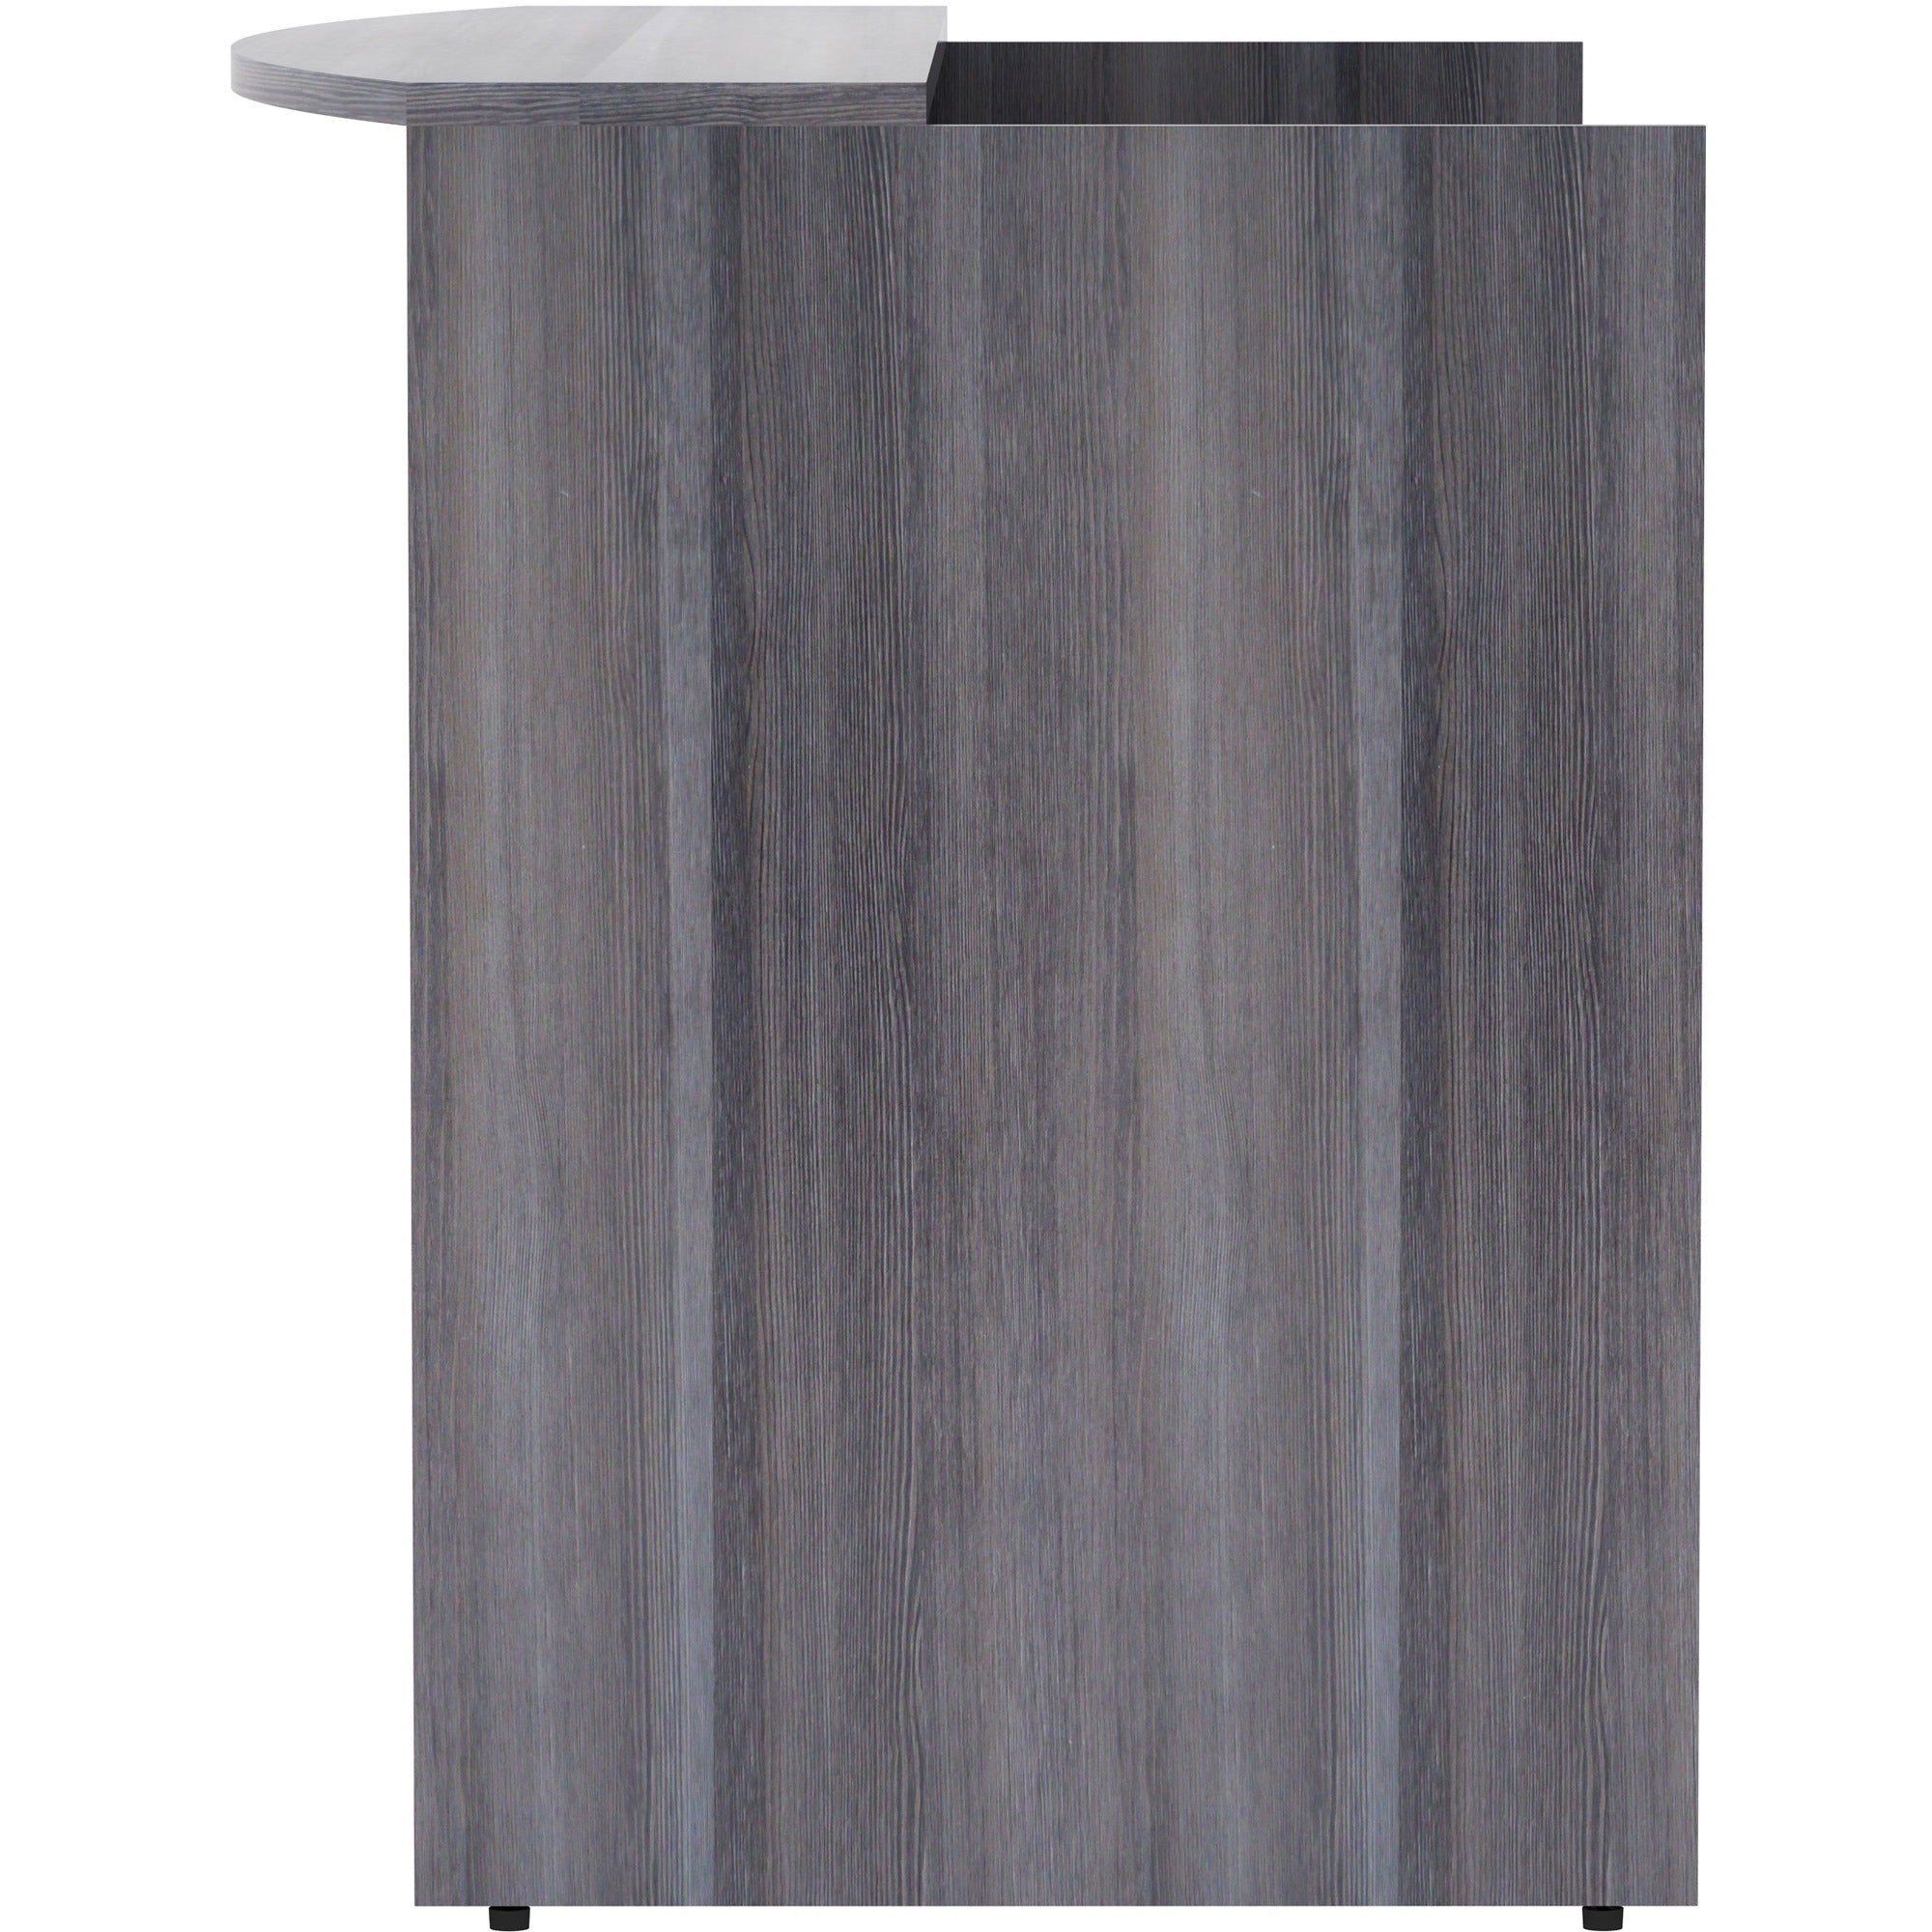 lorell-essentials-series-front-reception-desk-72-x-36425-desk-1-top-finish-weathered-charcoal-laminate_llr69595 - 4